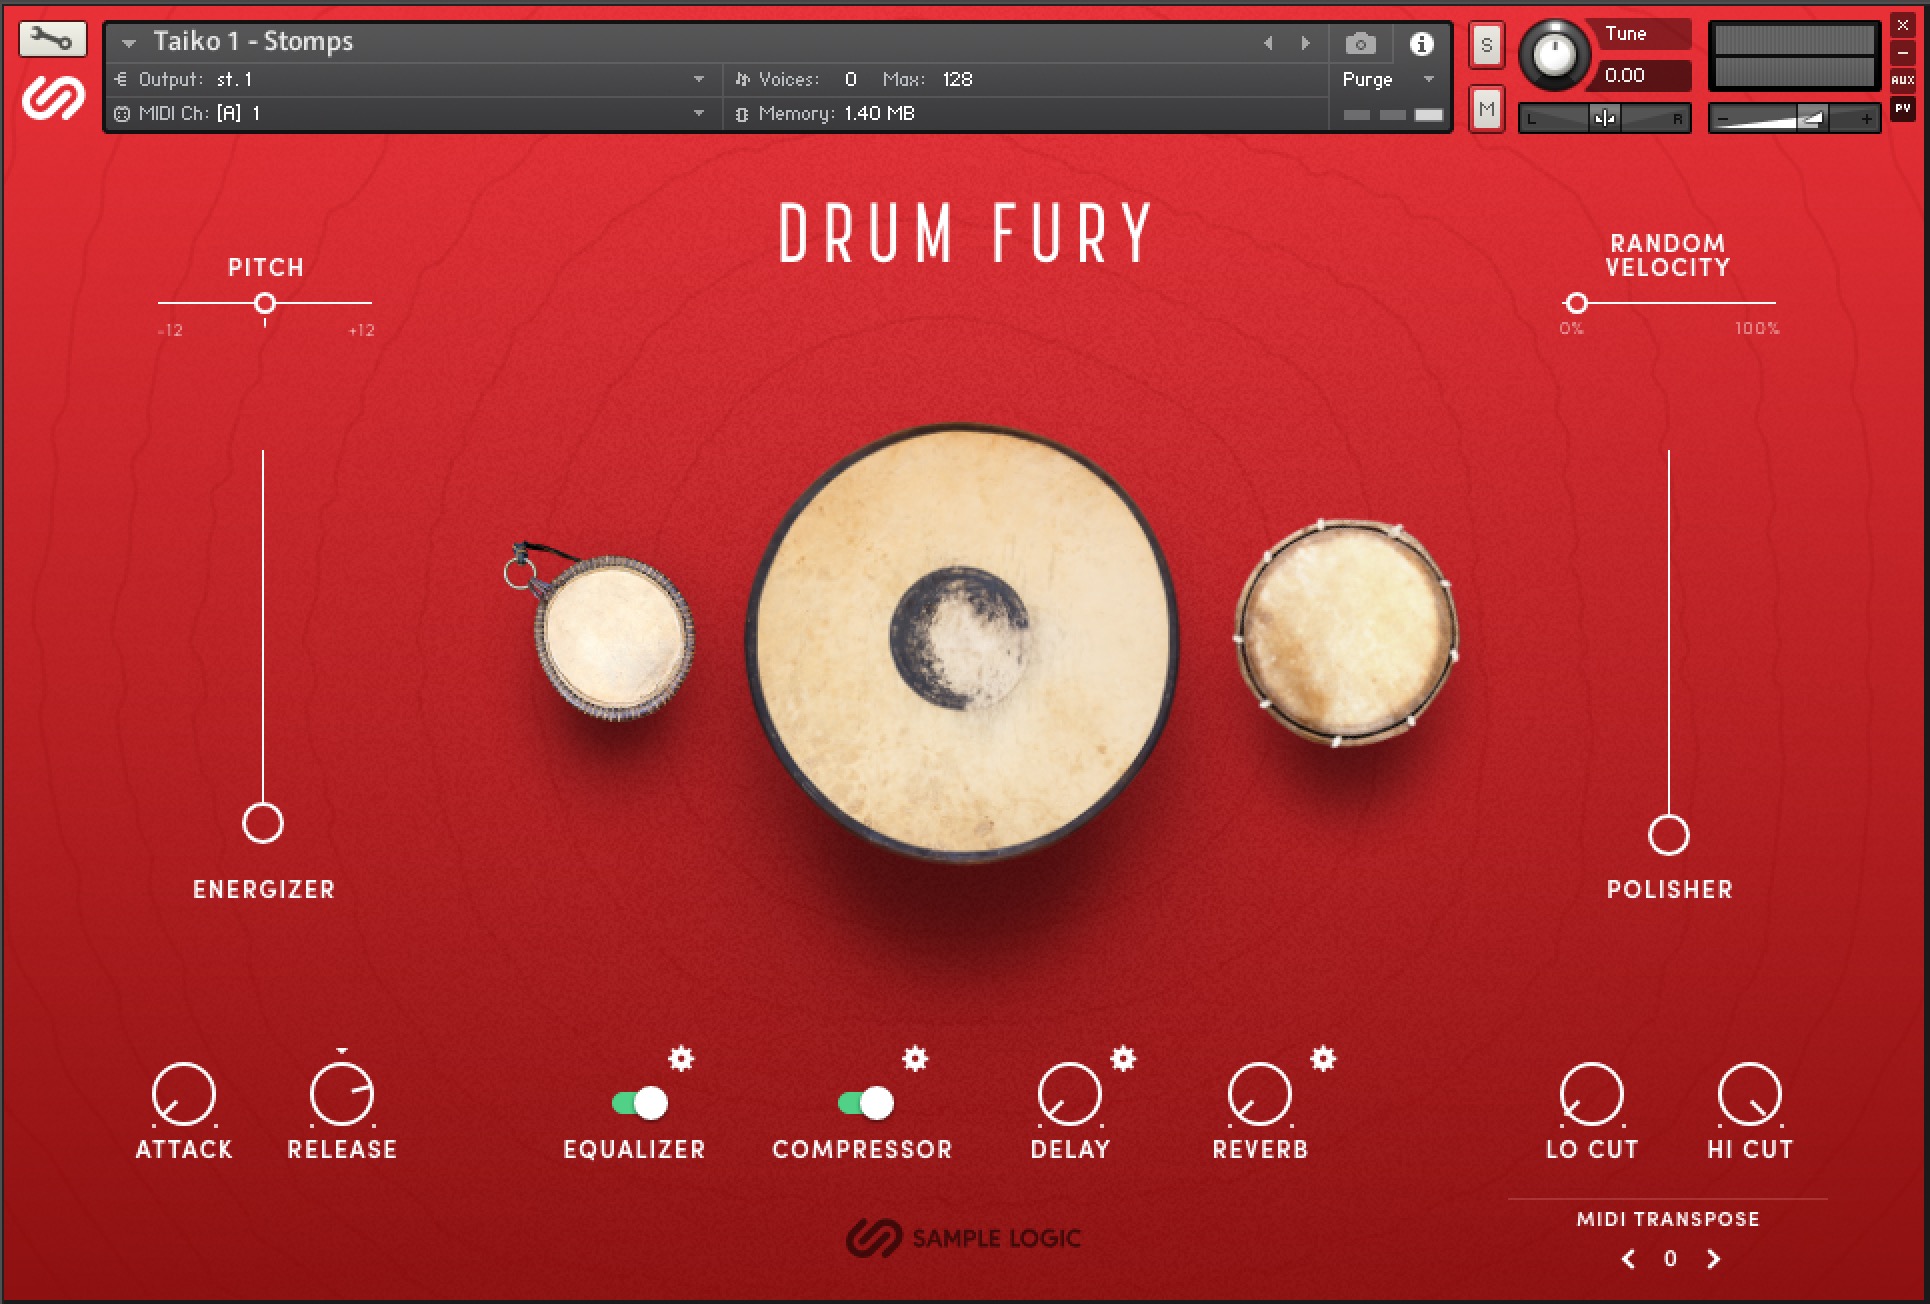 DRUM FURY Review – APOCALYPTIC DRUMS by Sample Logic